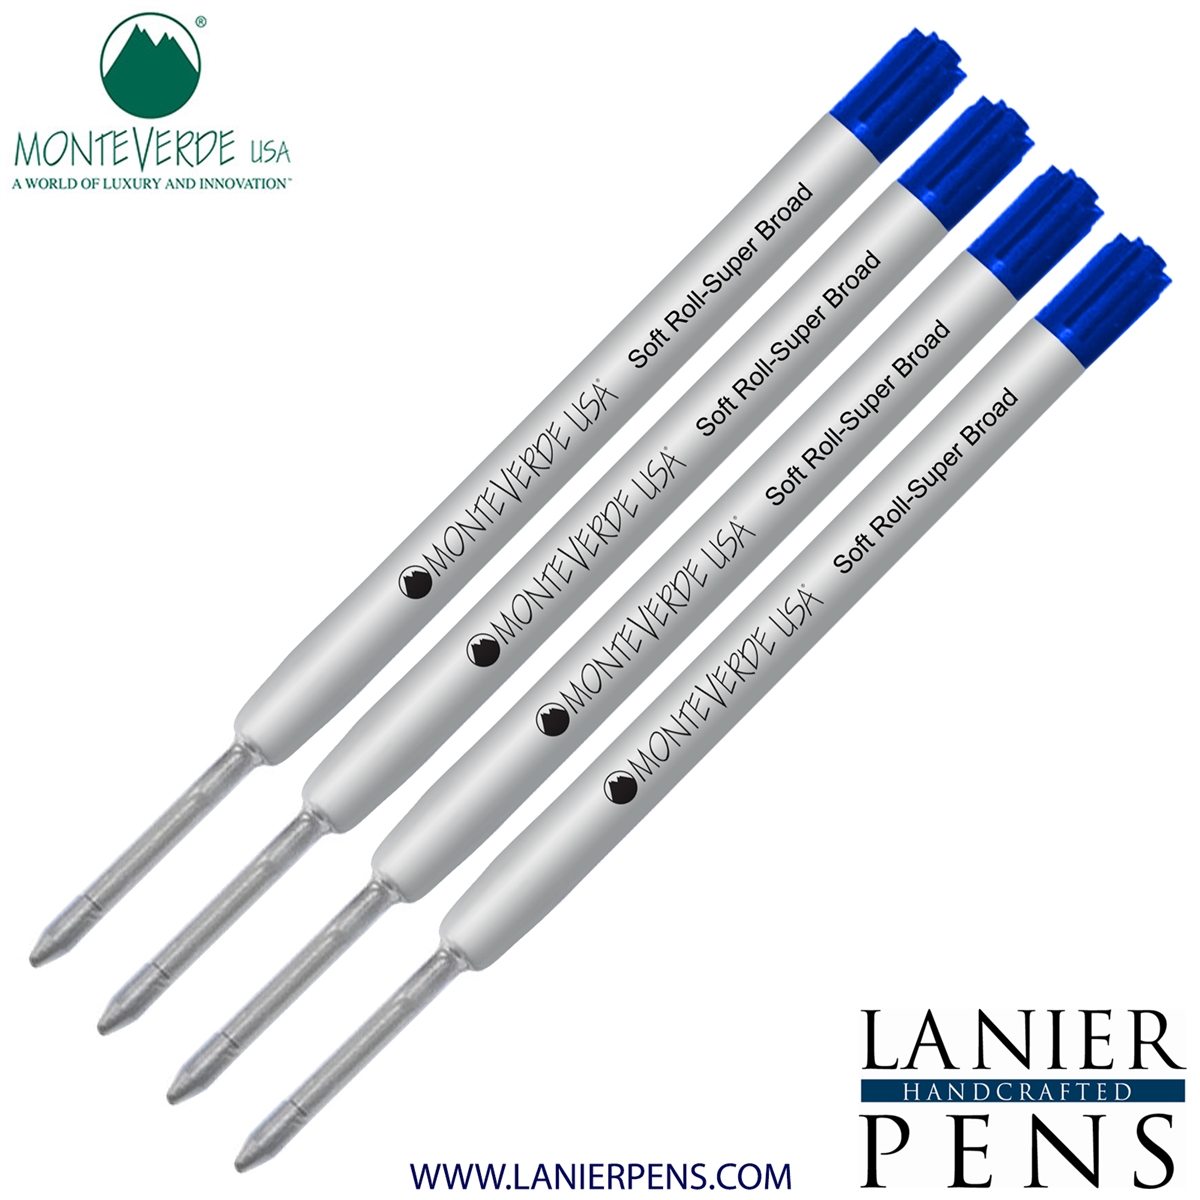 4 Pack - Monteverde Soft Roll Super Broad Ballpoint P15 Paste Ink Refill Compatible with most Parker Style Ballpoint Pens - Blue (Super Broad Tip 1.4mm) - Lanier Pens